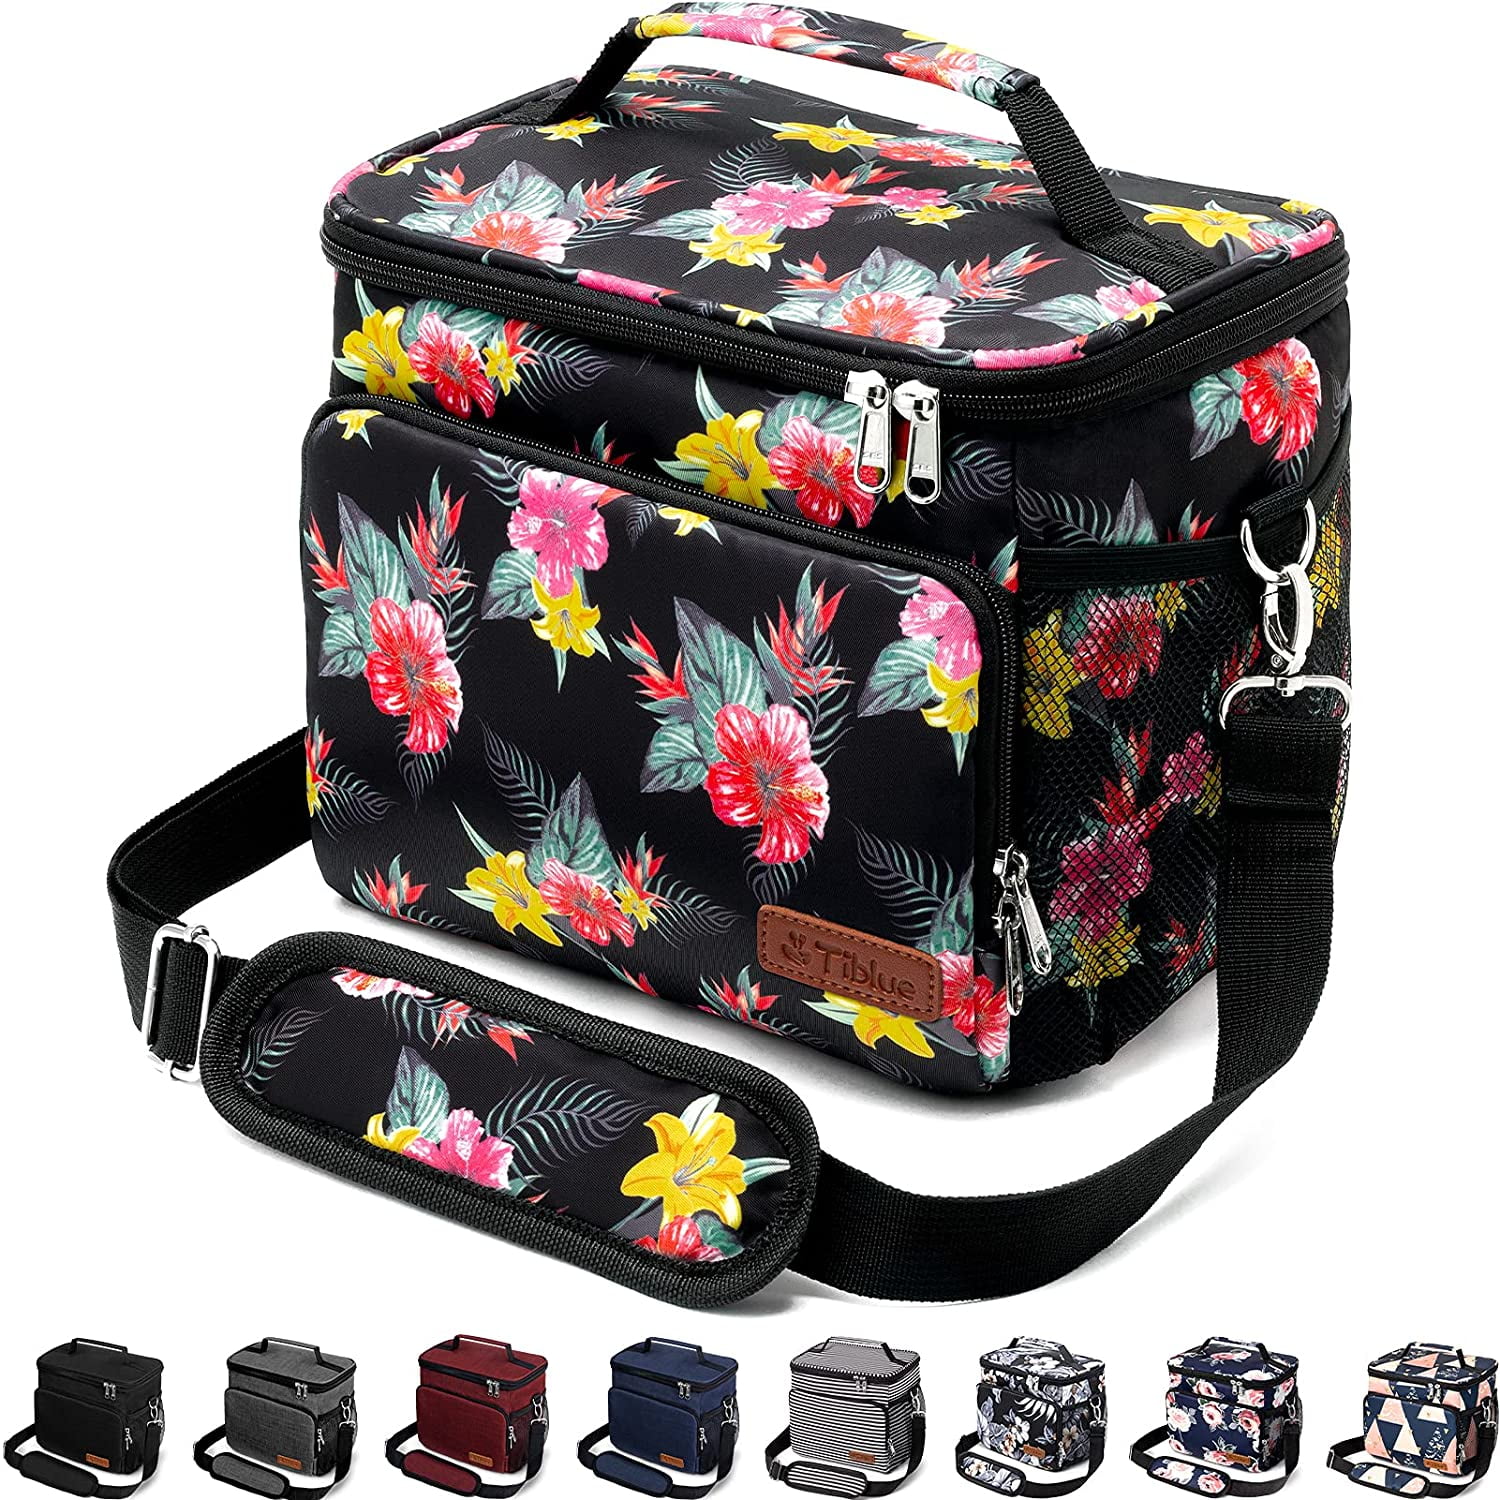 Venture Pal Detachable 2-in-1 Insulated Cooler Lunch Bag Compact Reusable Office Work School Picnic Hiking Beach Lunch Box Organizer with Adjustable Shoulder Strap for Women,Men and Kids 